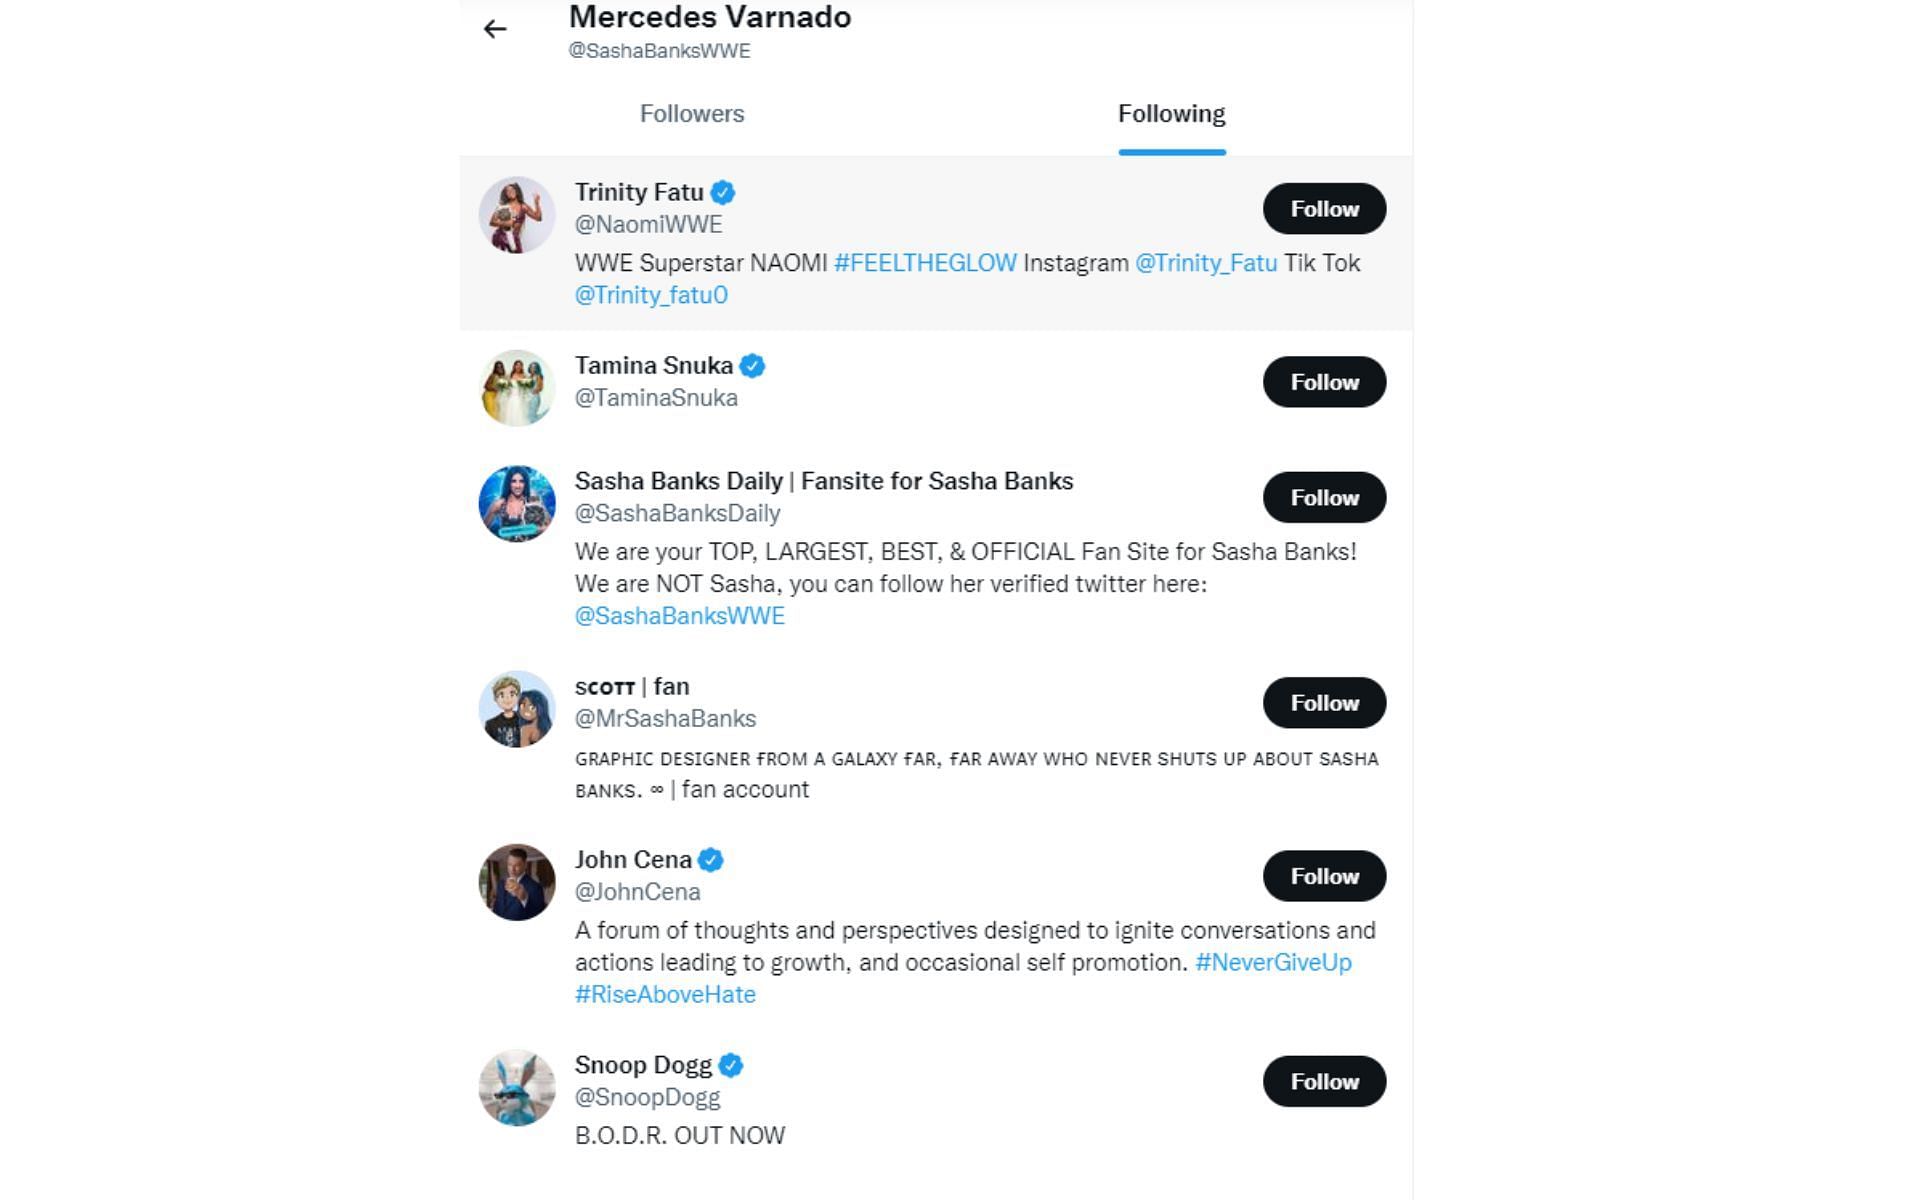 The six accounts followed by Banks on Twitter.